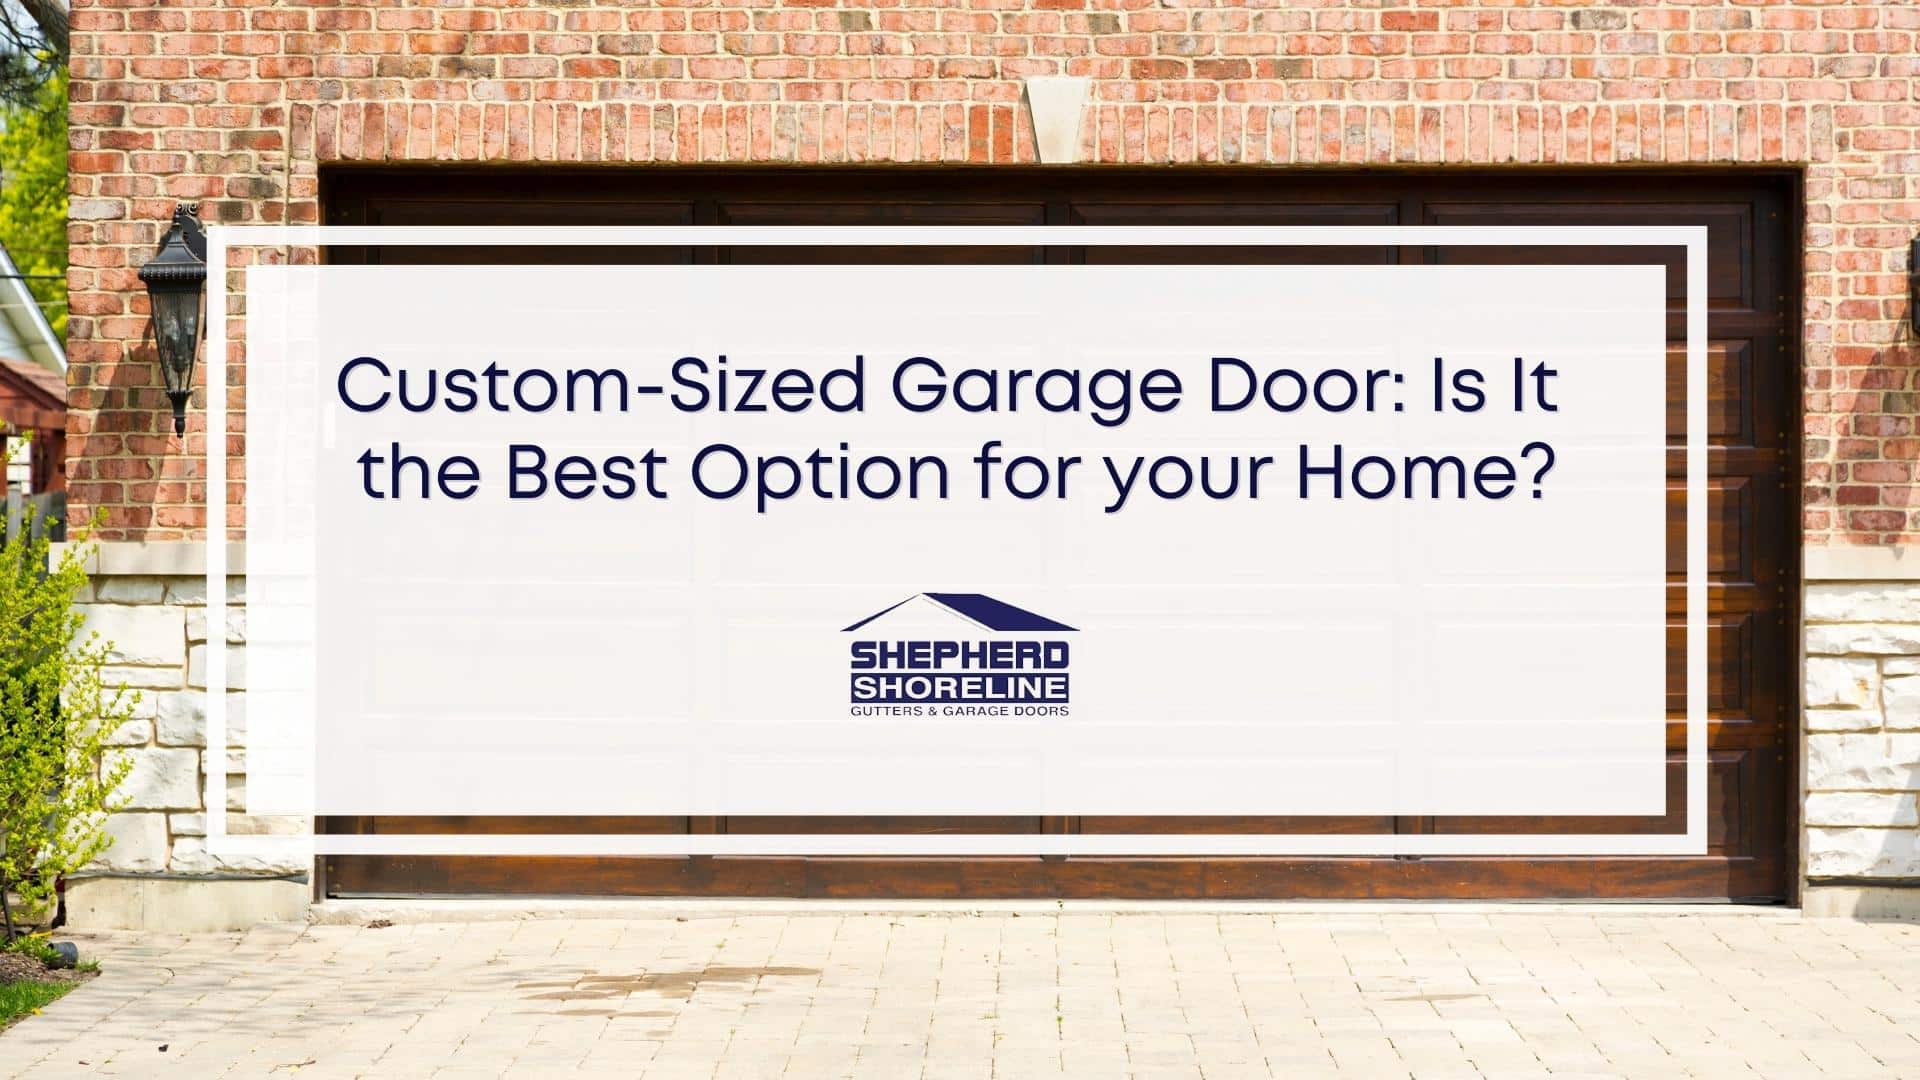 Featured image of custom-sized garage door: is it the best option for your home